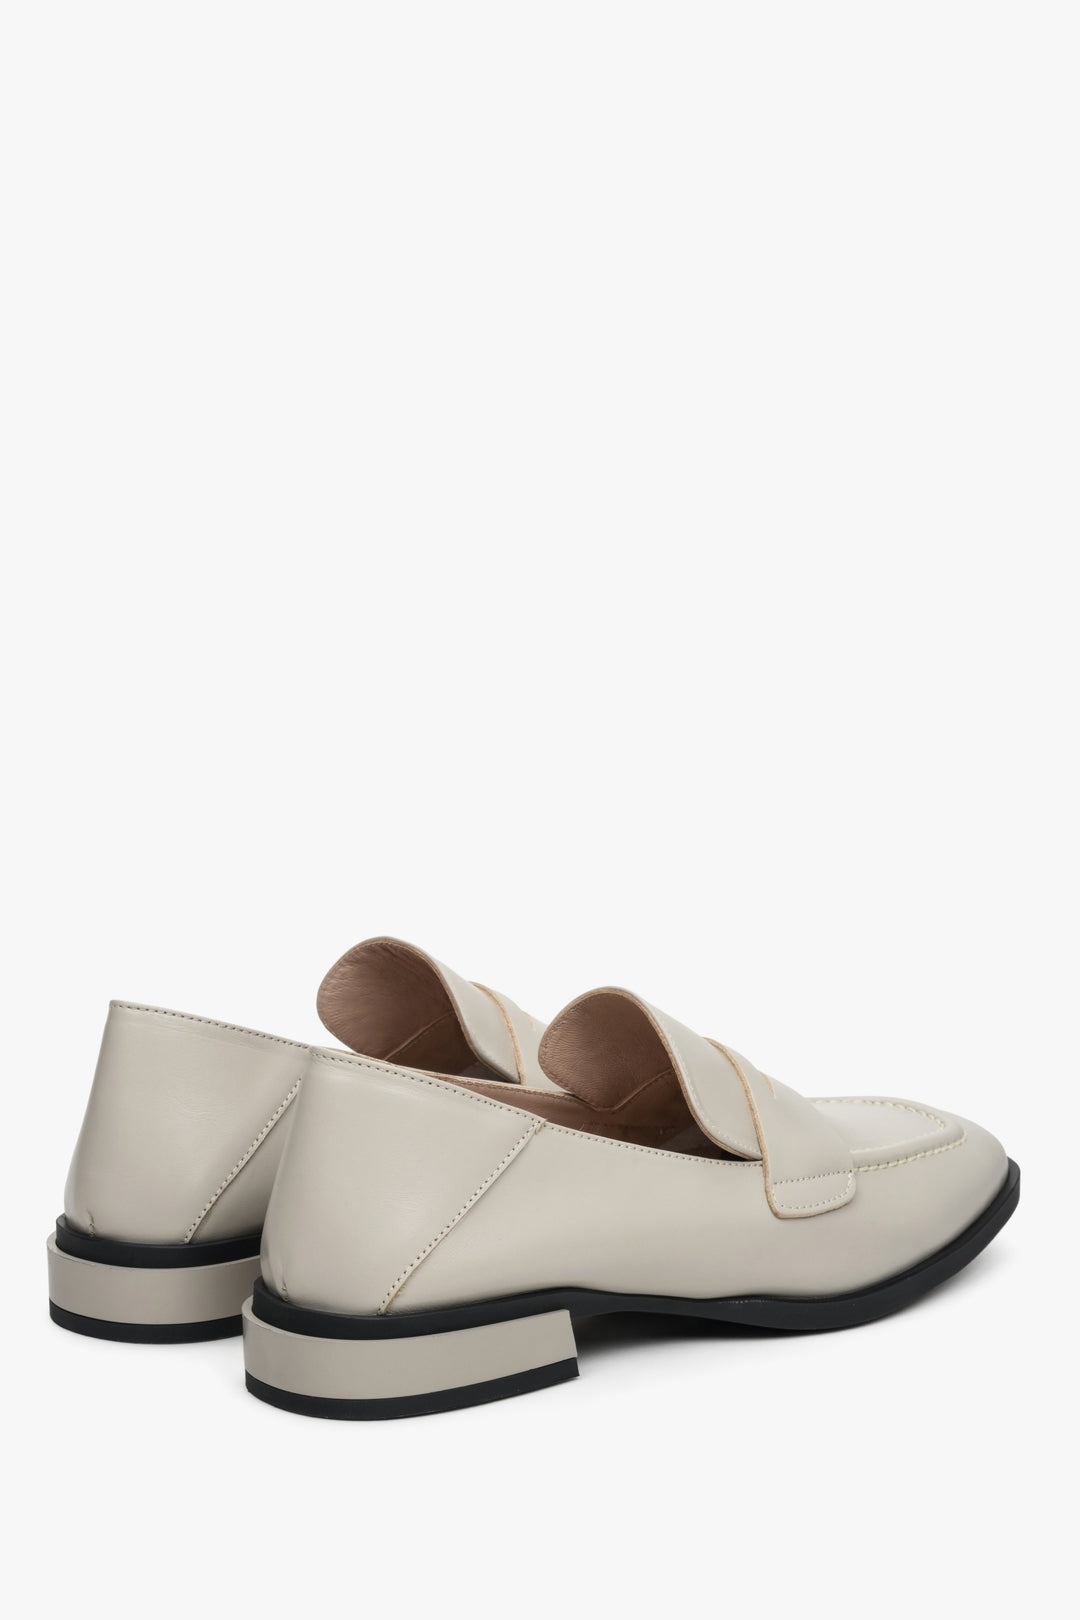 Women's beige loafers made of genuine leather with a low heel - close-up on the heel and side seam.